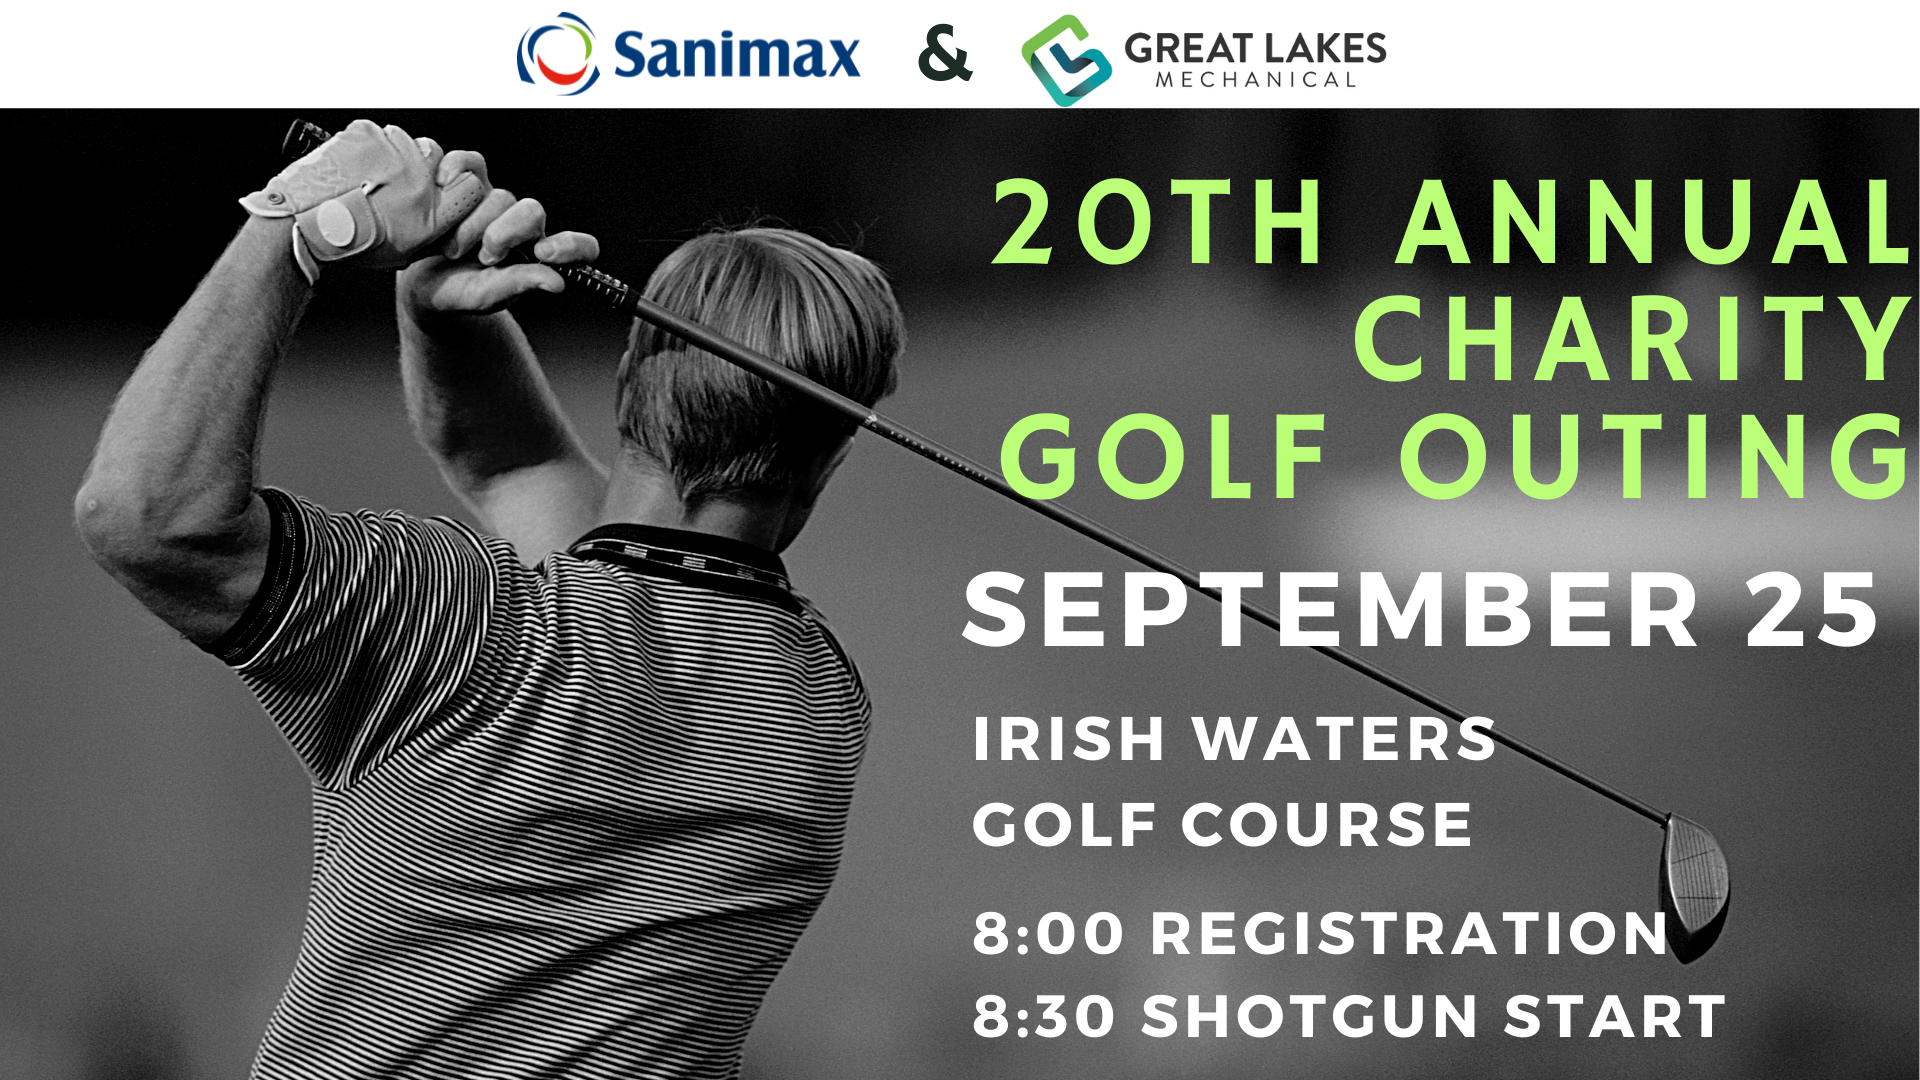 Sanimax and Great Lakes Mechanical 20th Annual Charity Golf Outing